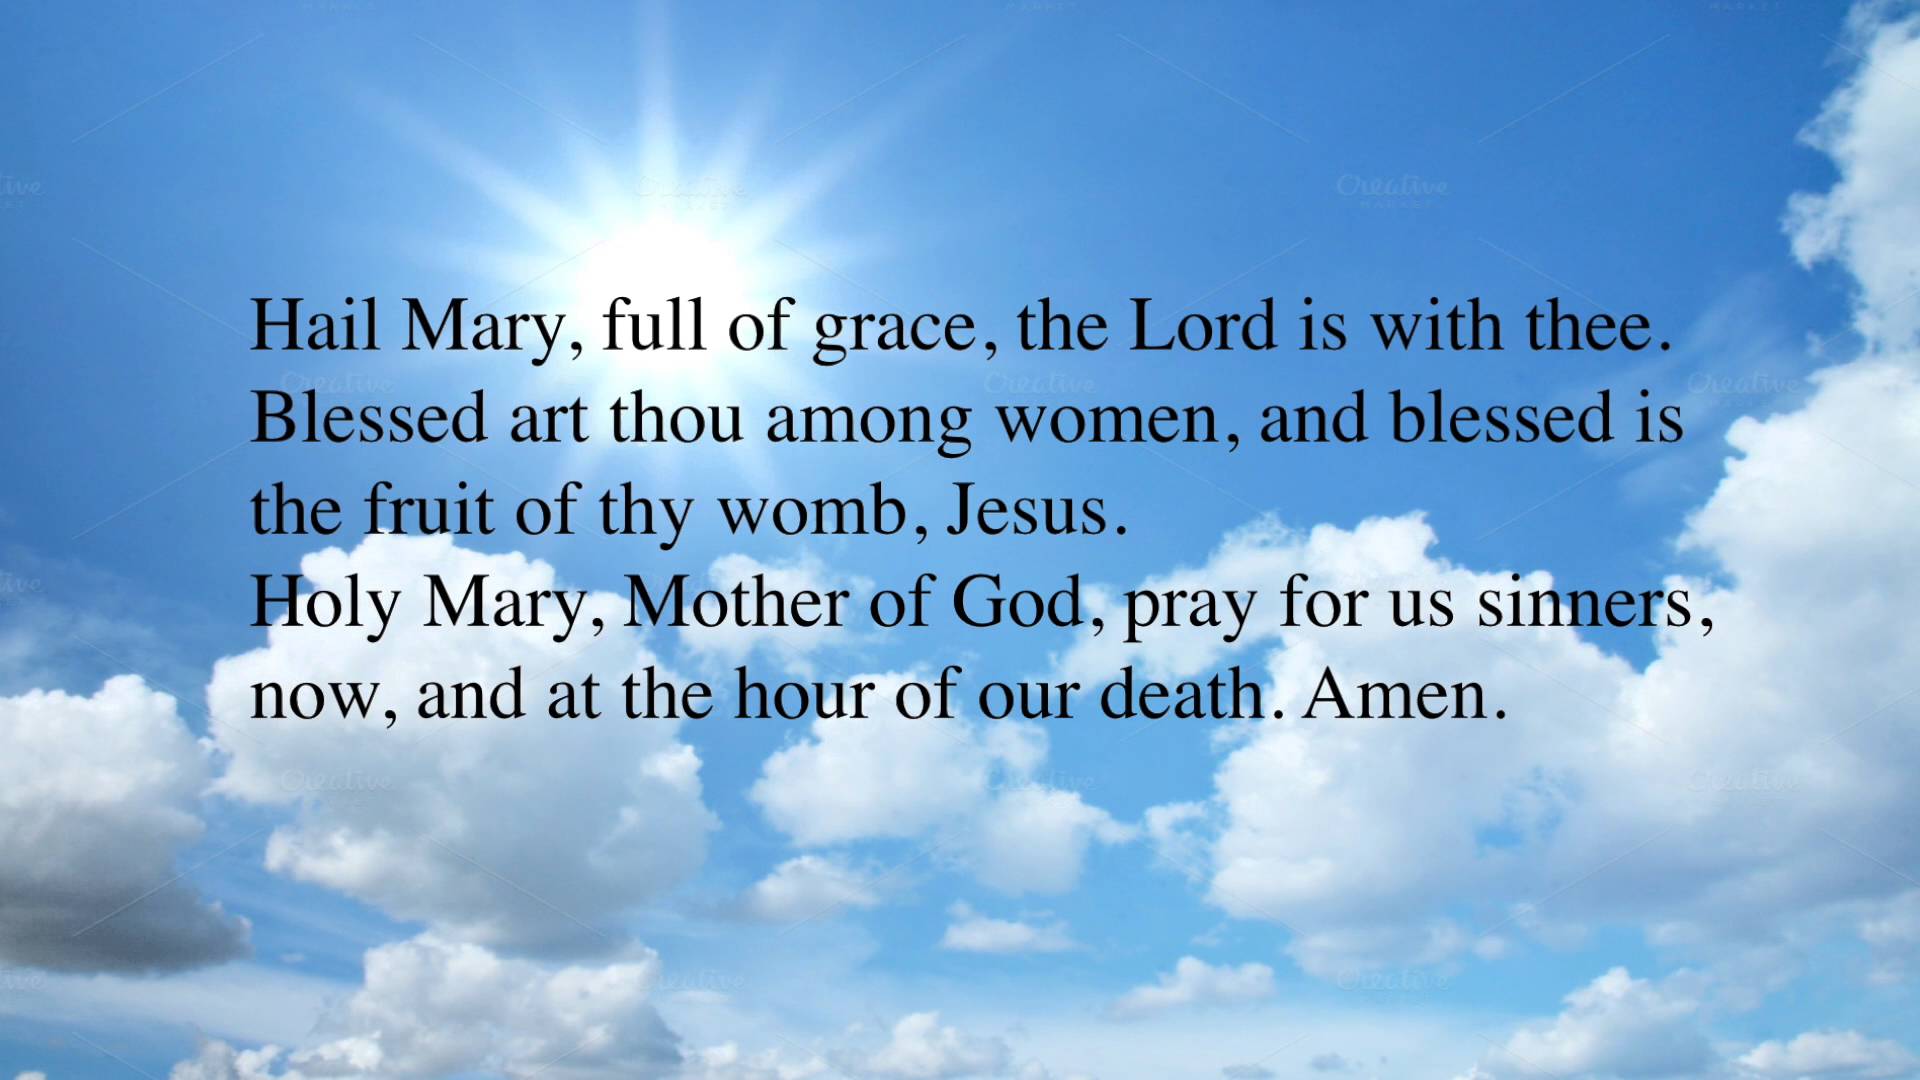 Pray the Our Father, Hail Mary & Glory Be - YouTube